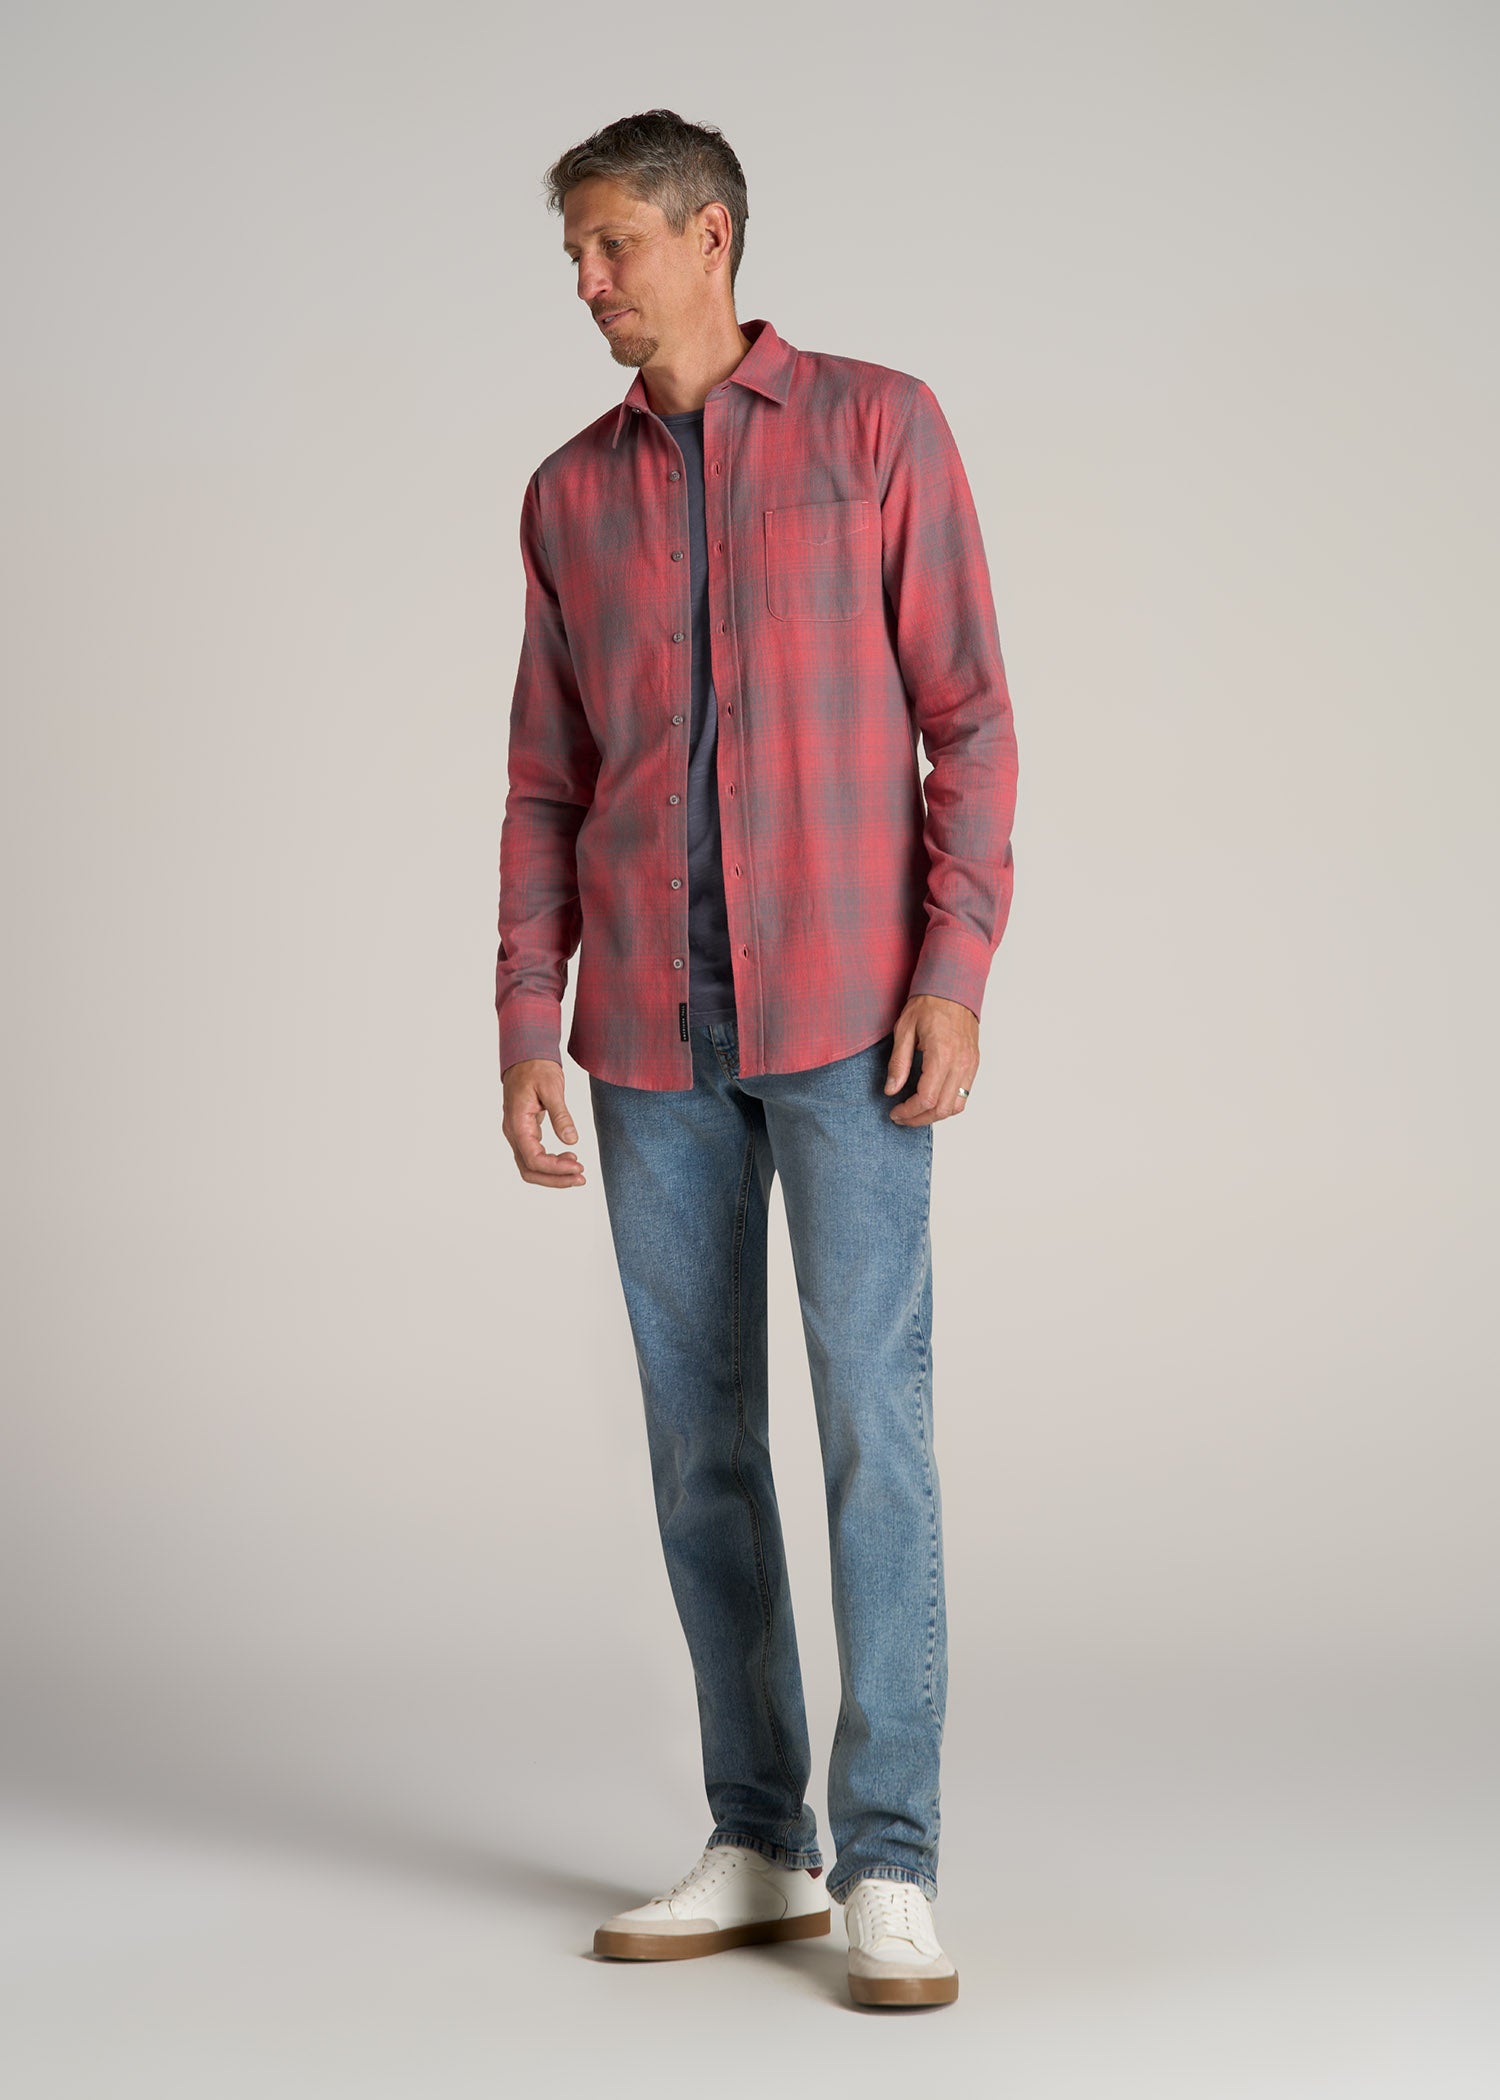 Nelson Flannel Shirt for Tall Men in Navy and Khaki Plaid L / Semi Tall / Navy and Khaki Plaid